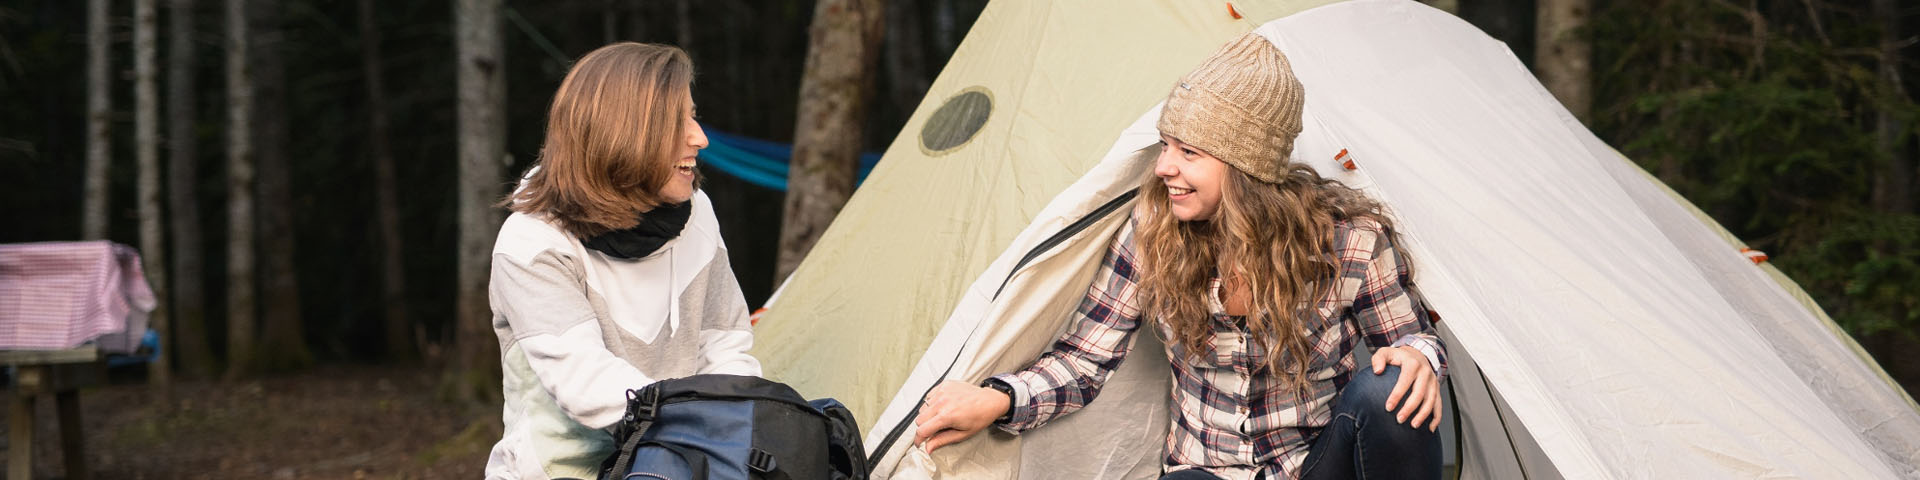 Two visitors talking near their tent.